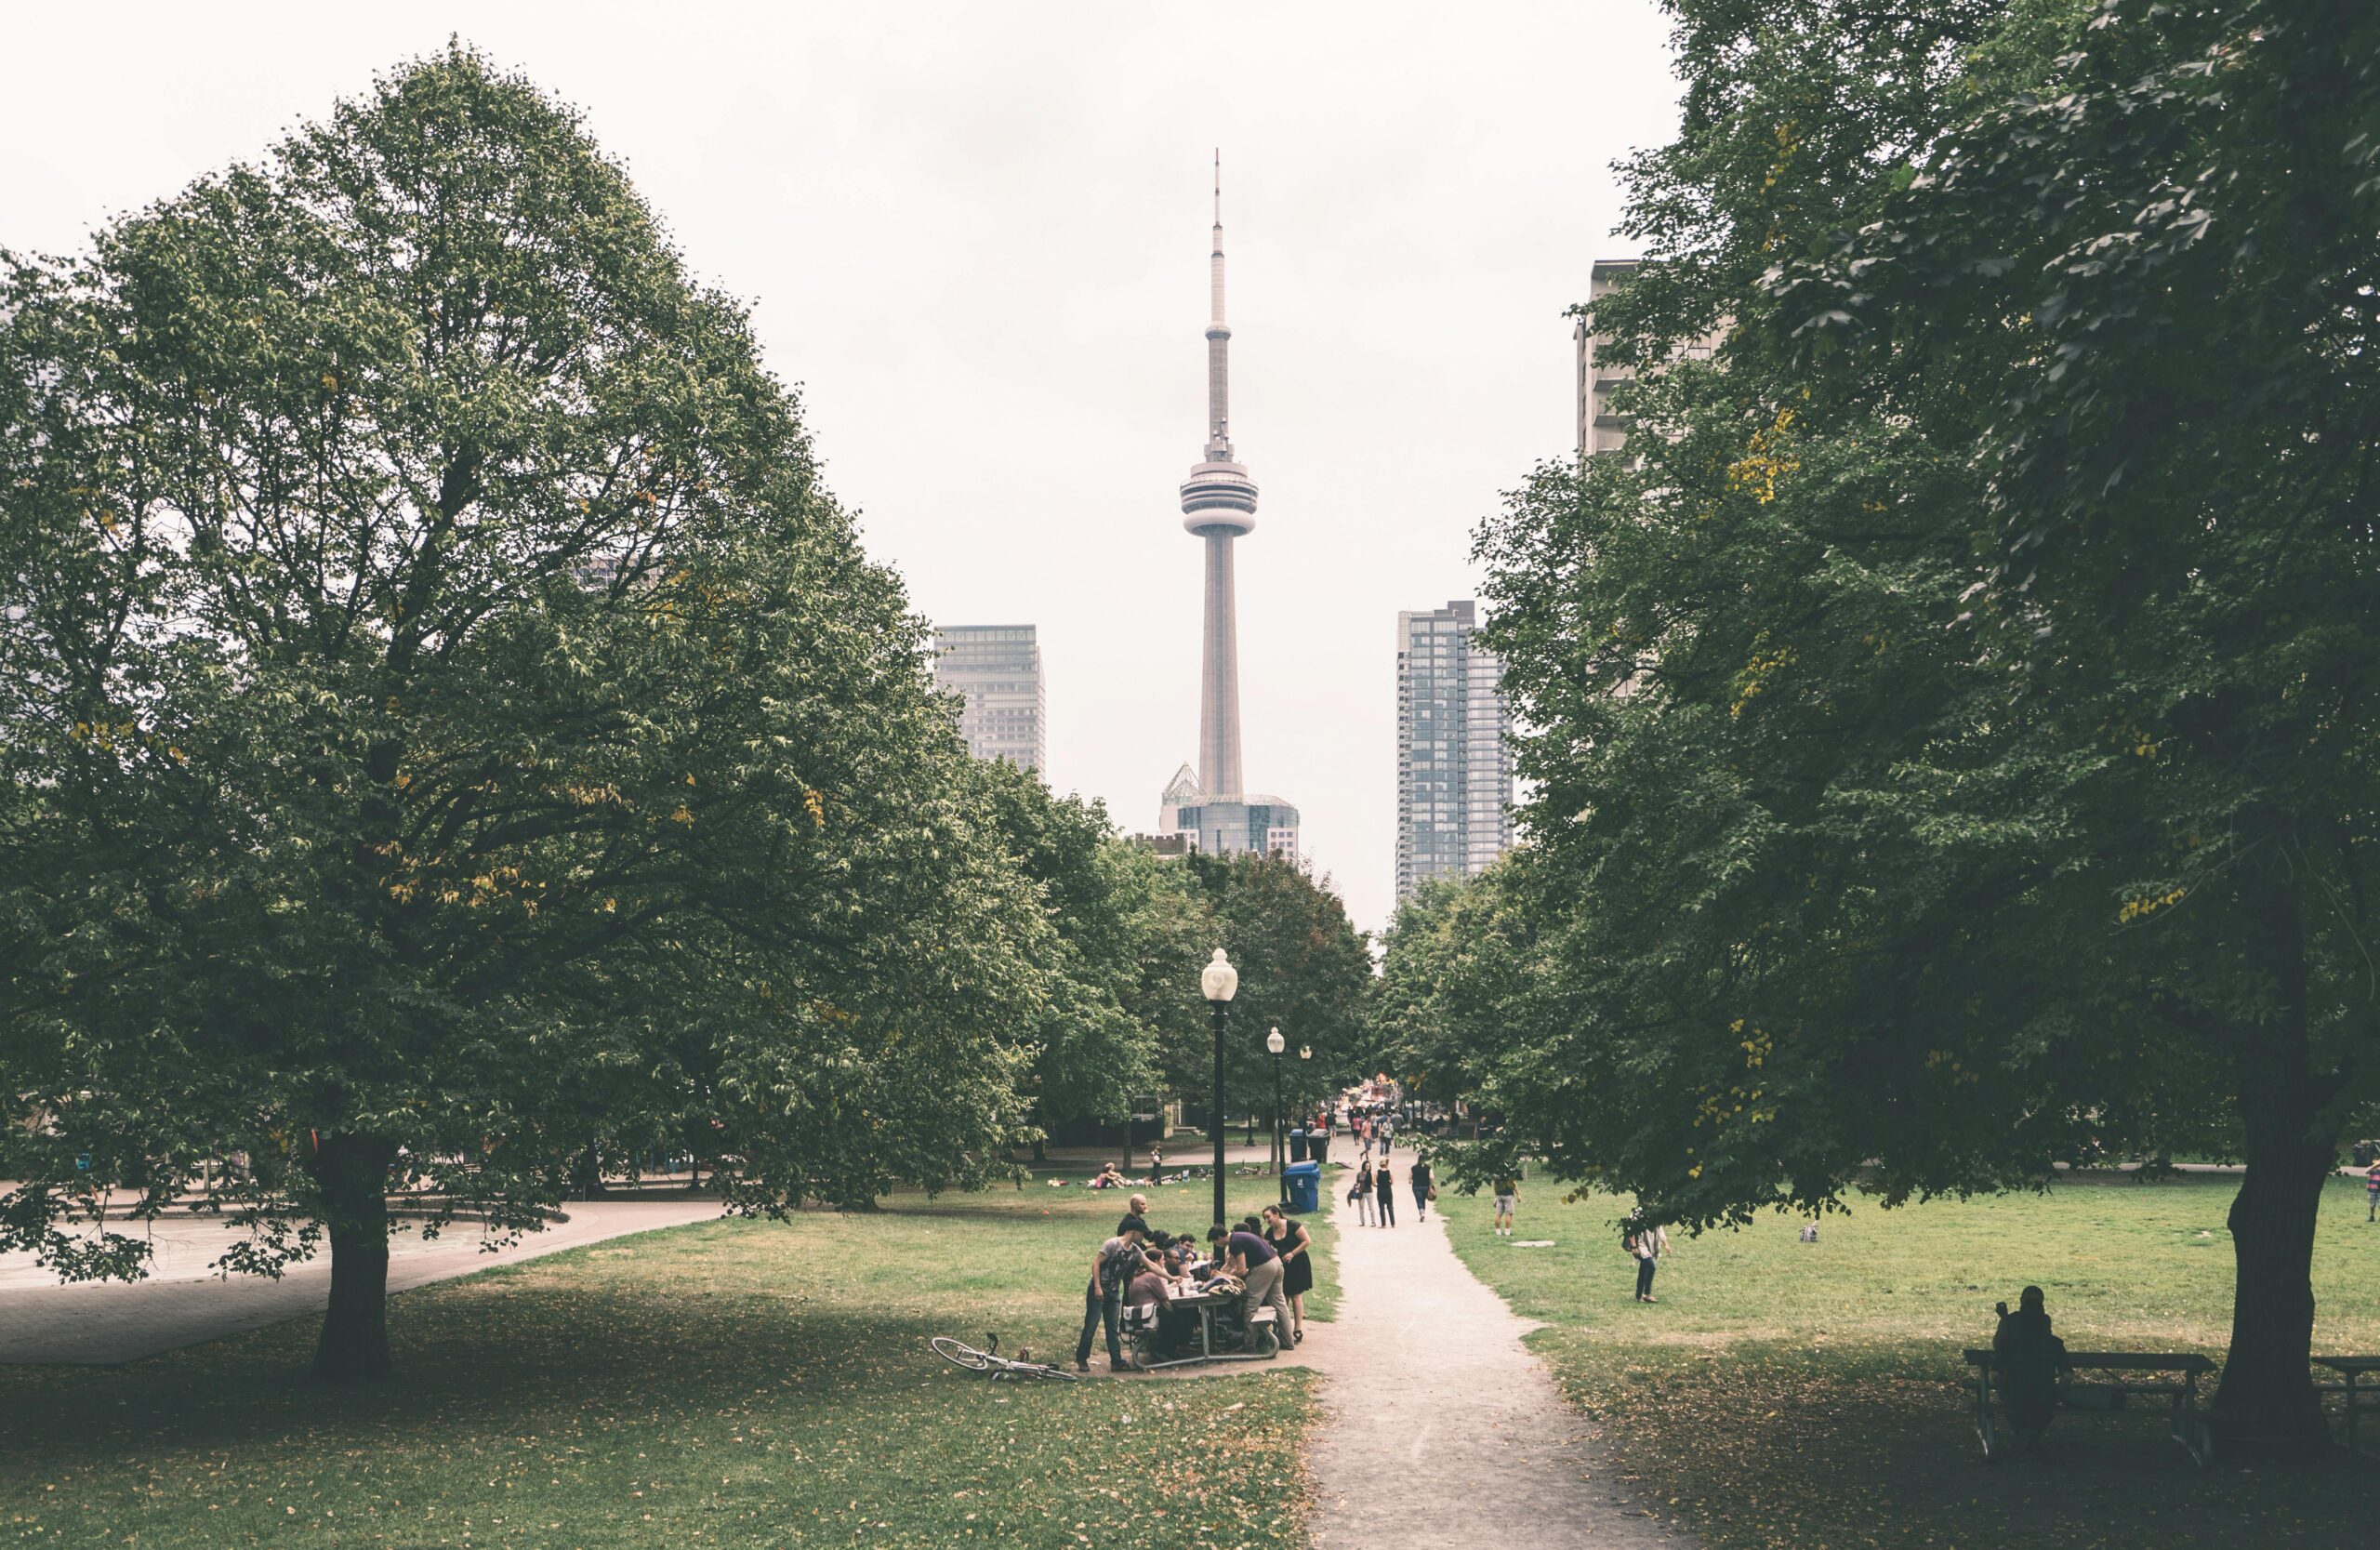 A view of Toronto's CN Tower from a local park.